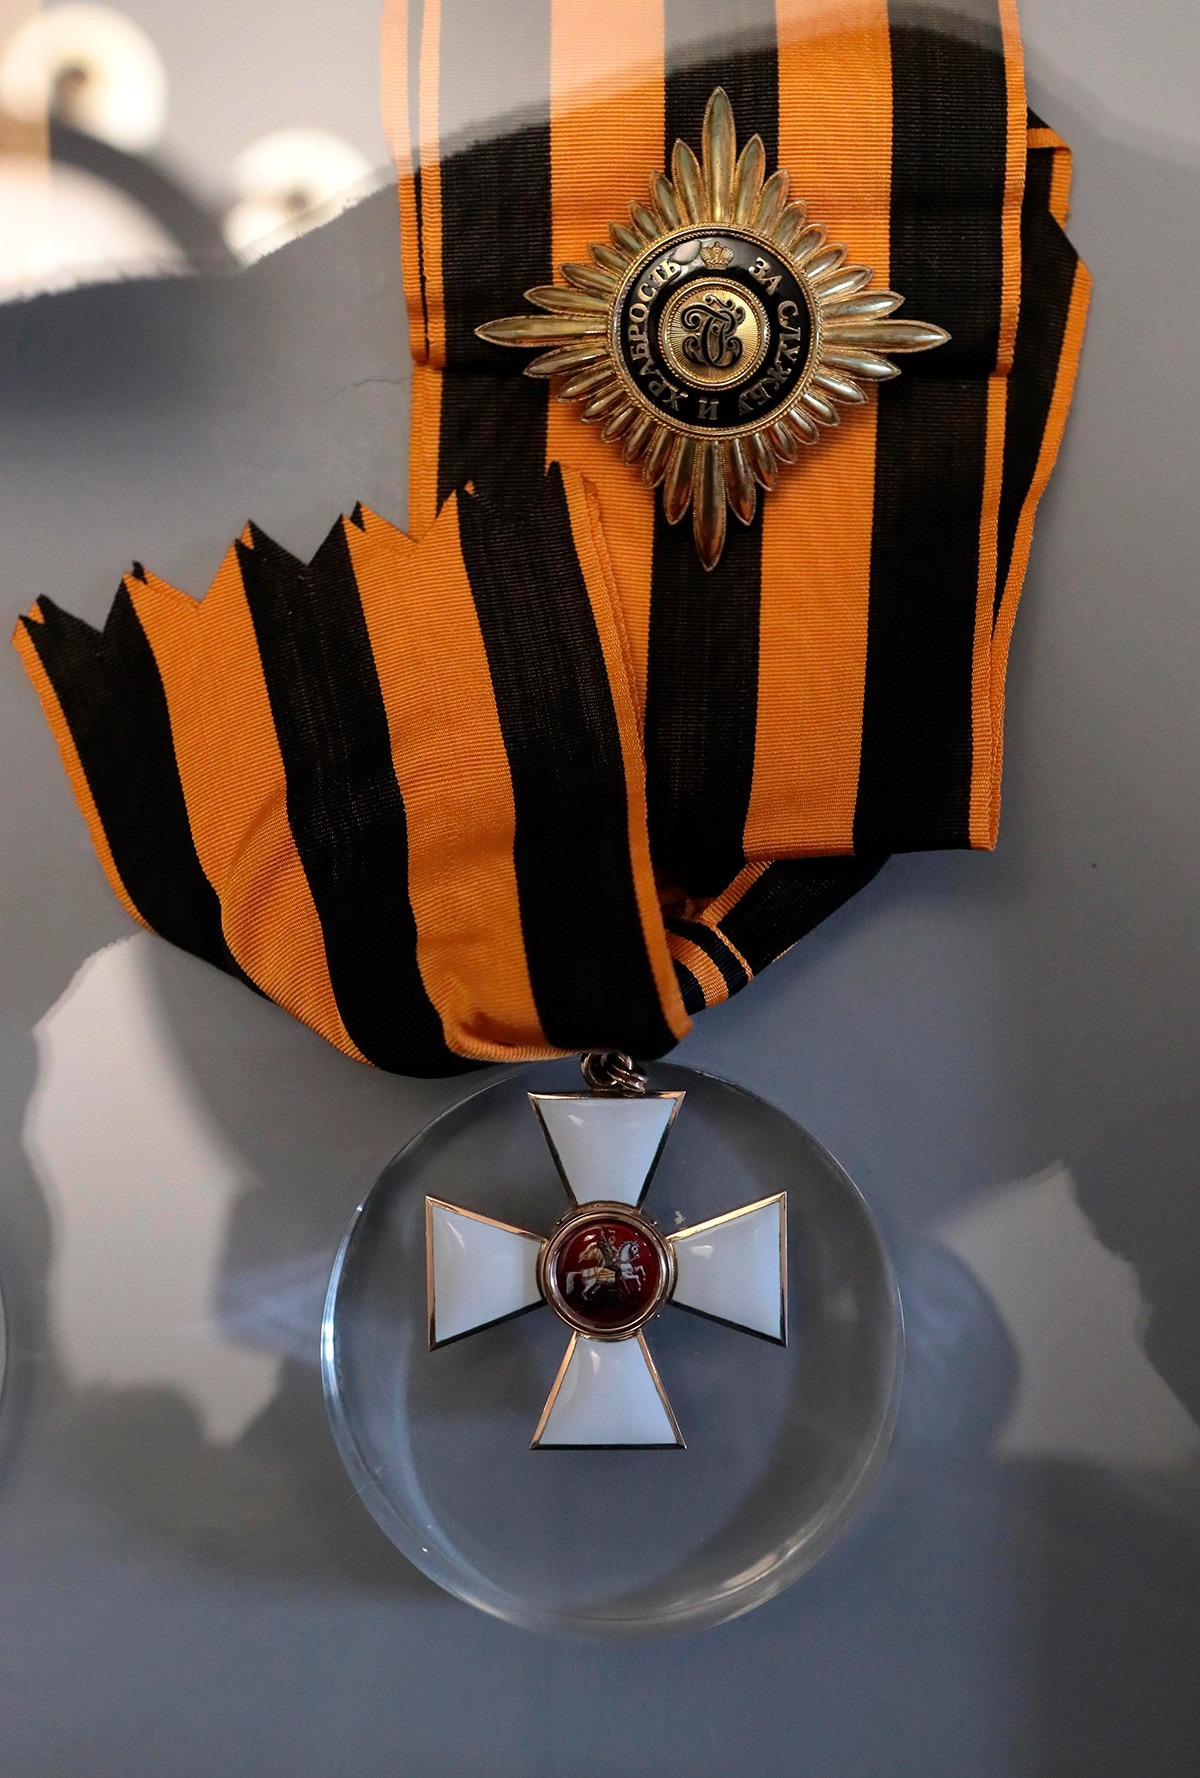 The Star and the Cross (Badge) of the Order of St. George, 1st class